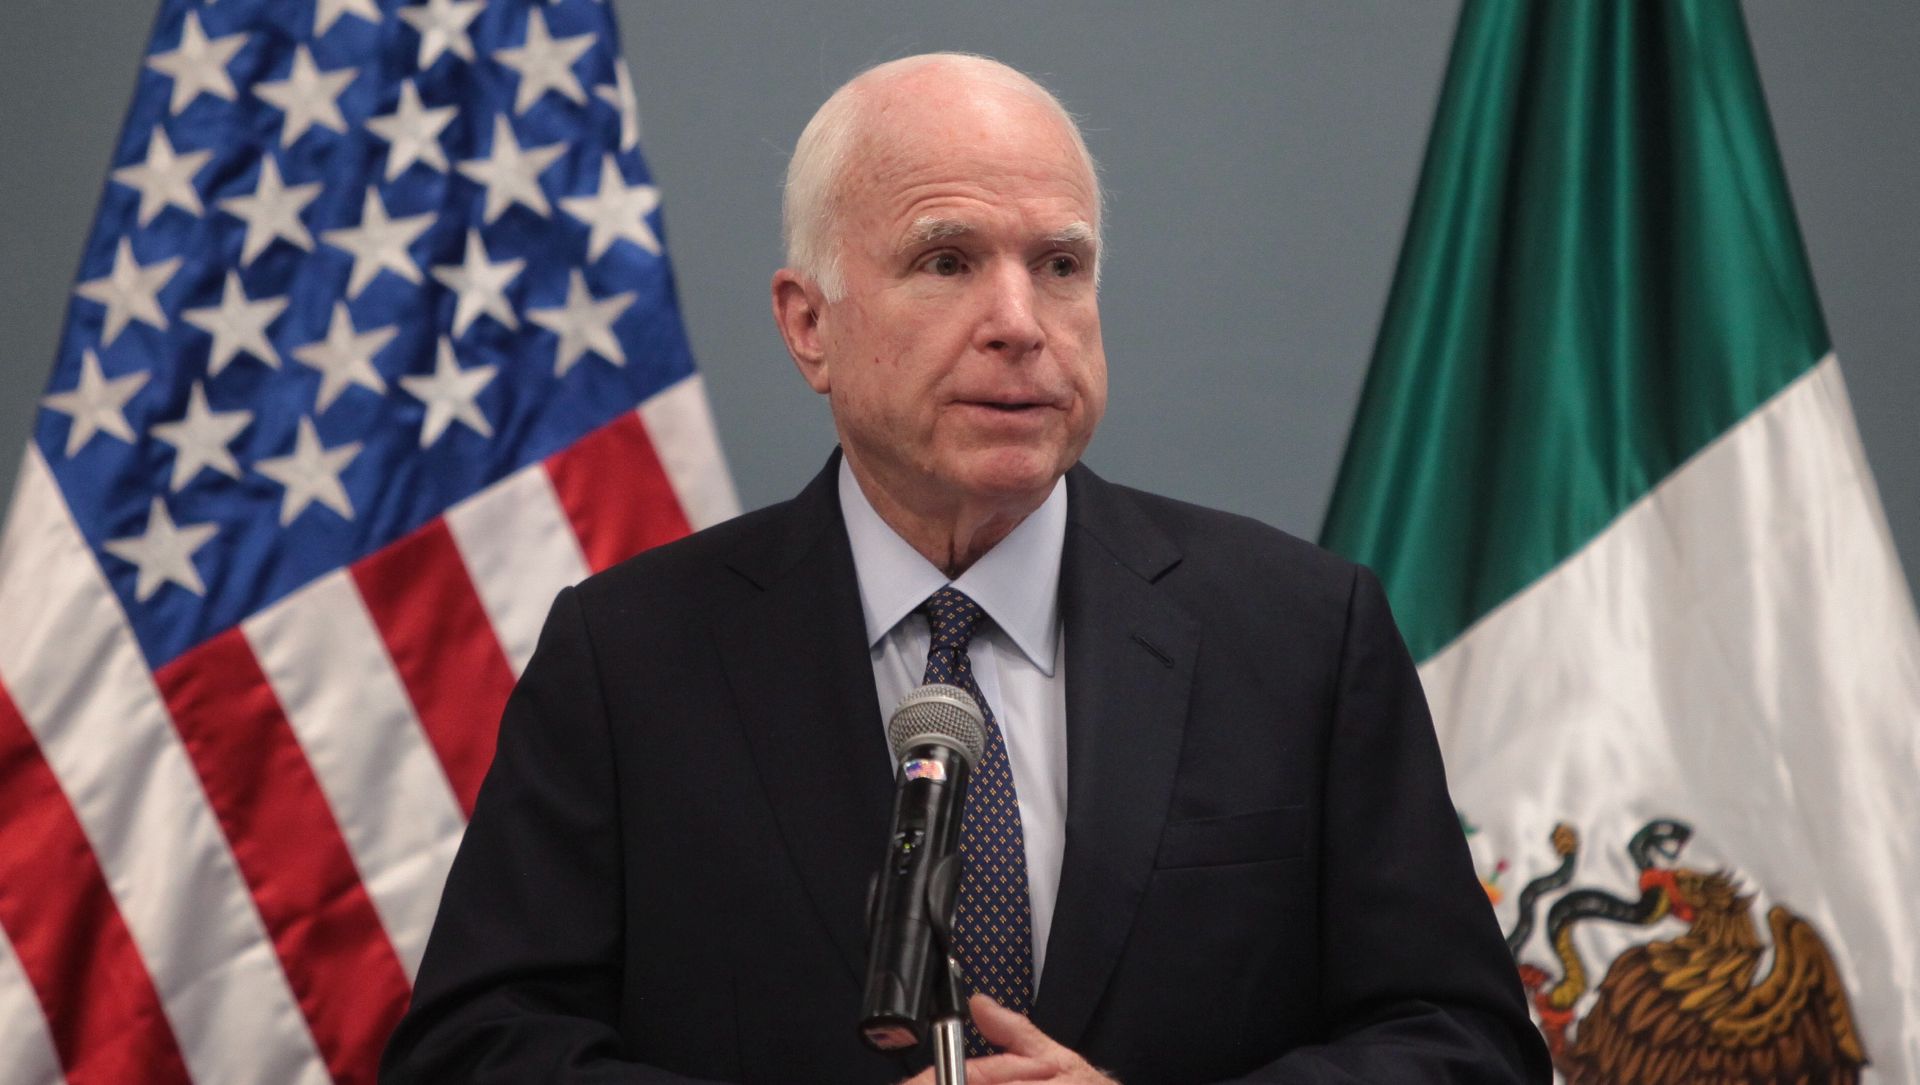 epa06972996 (FILE) - US Republican Senator for Arizona John McCain, speaks during a press conference in Mexico City, Mexico, 20 December 2016. According to news reports, Republican Senator John McCain has passed away on 25 August 2018 at the age of 81. John McCain - a former naval aviator shot down on a mission over Hanoi in October 1967, captured and made a prisoner of war until 1973 - was the Republican nominee for President of the United States in the 2008 election, which he lost to Barack Obama.  EPA/SASHENKA GUTIERREZ *** Local Caption *** 53181103